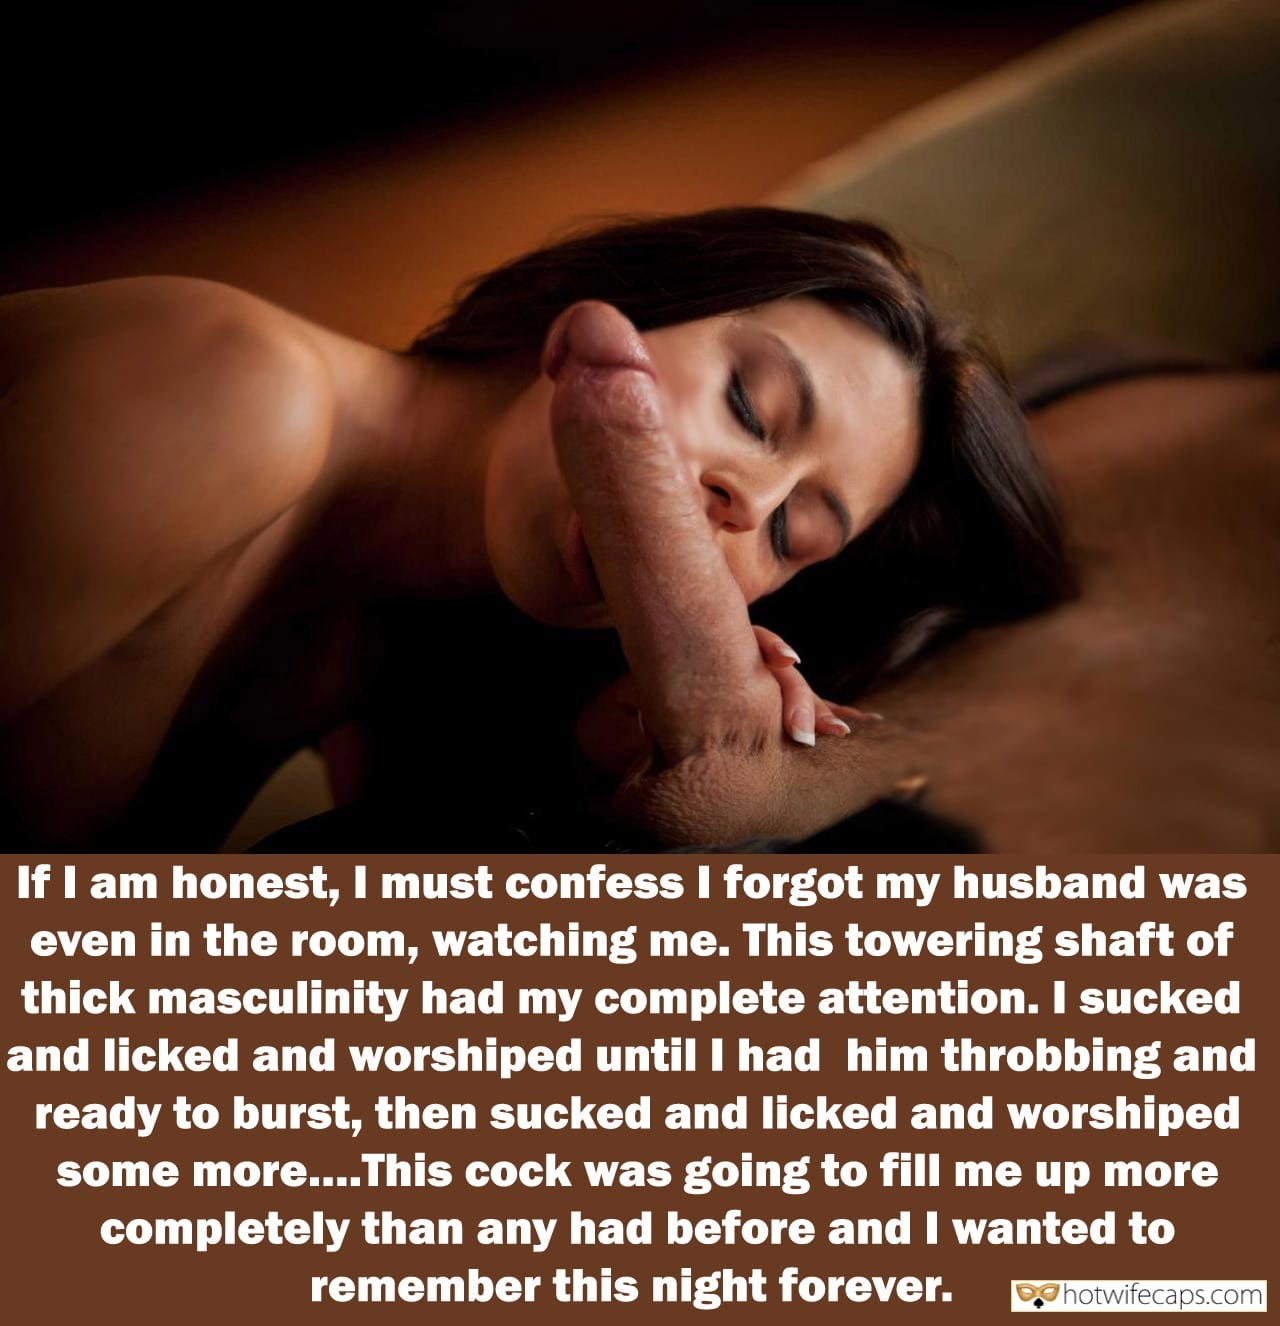 Wife Sharing Blowjob Bigger Cock hotwife caption: If I am honest, I must confess I forgot my husband was even in the room, watching me. This towering shaft of thick masculinity had my complete attention. I sucked and licked and worshiped until I had him throbbing and...